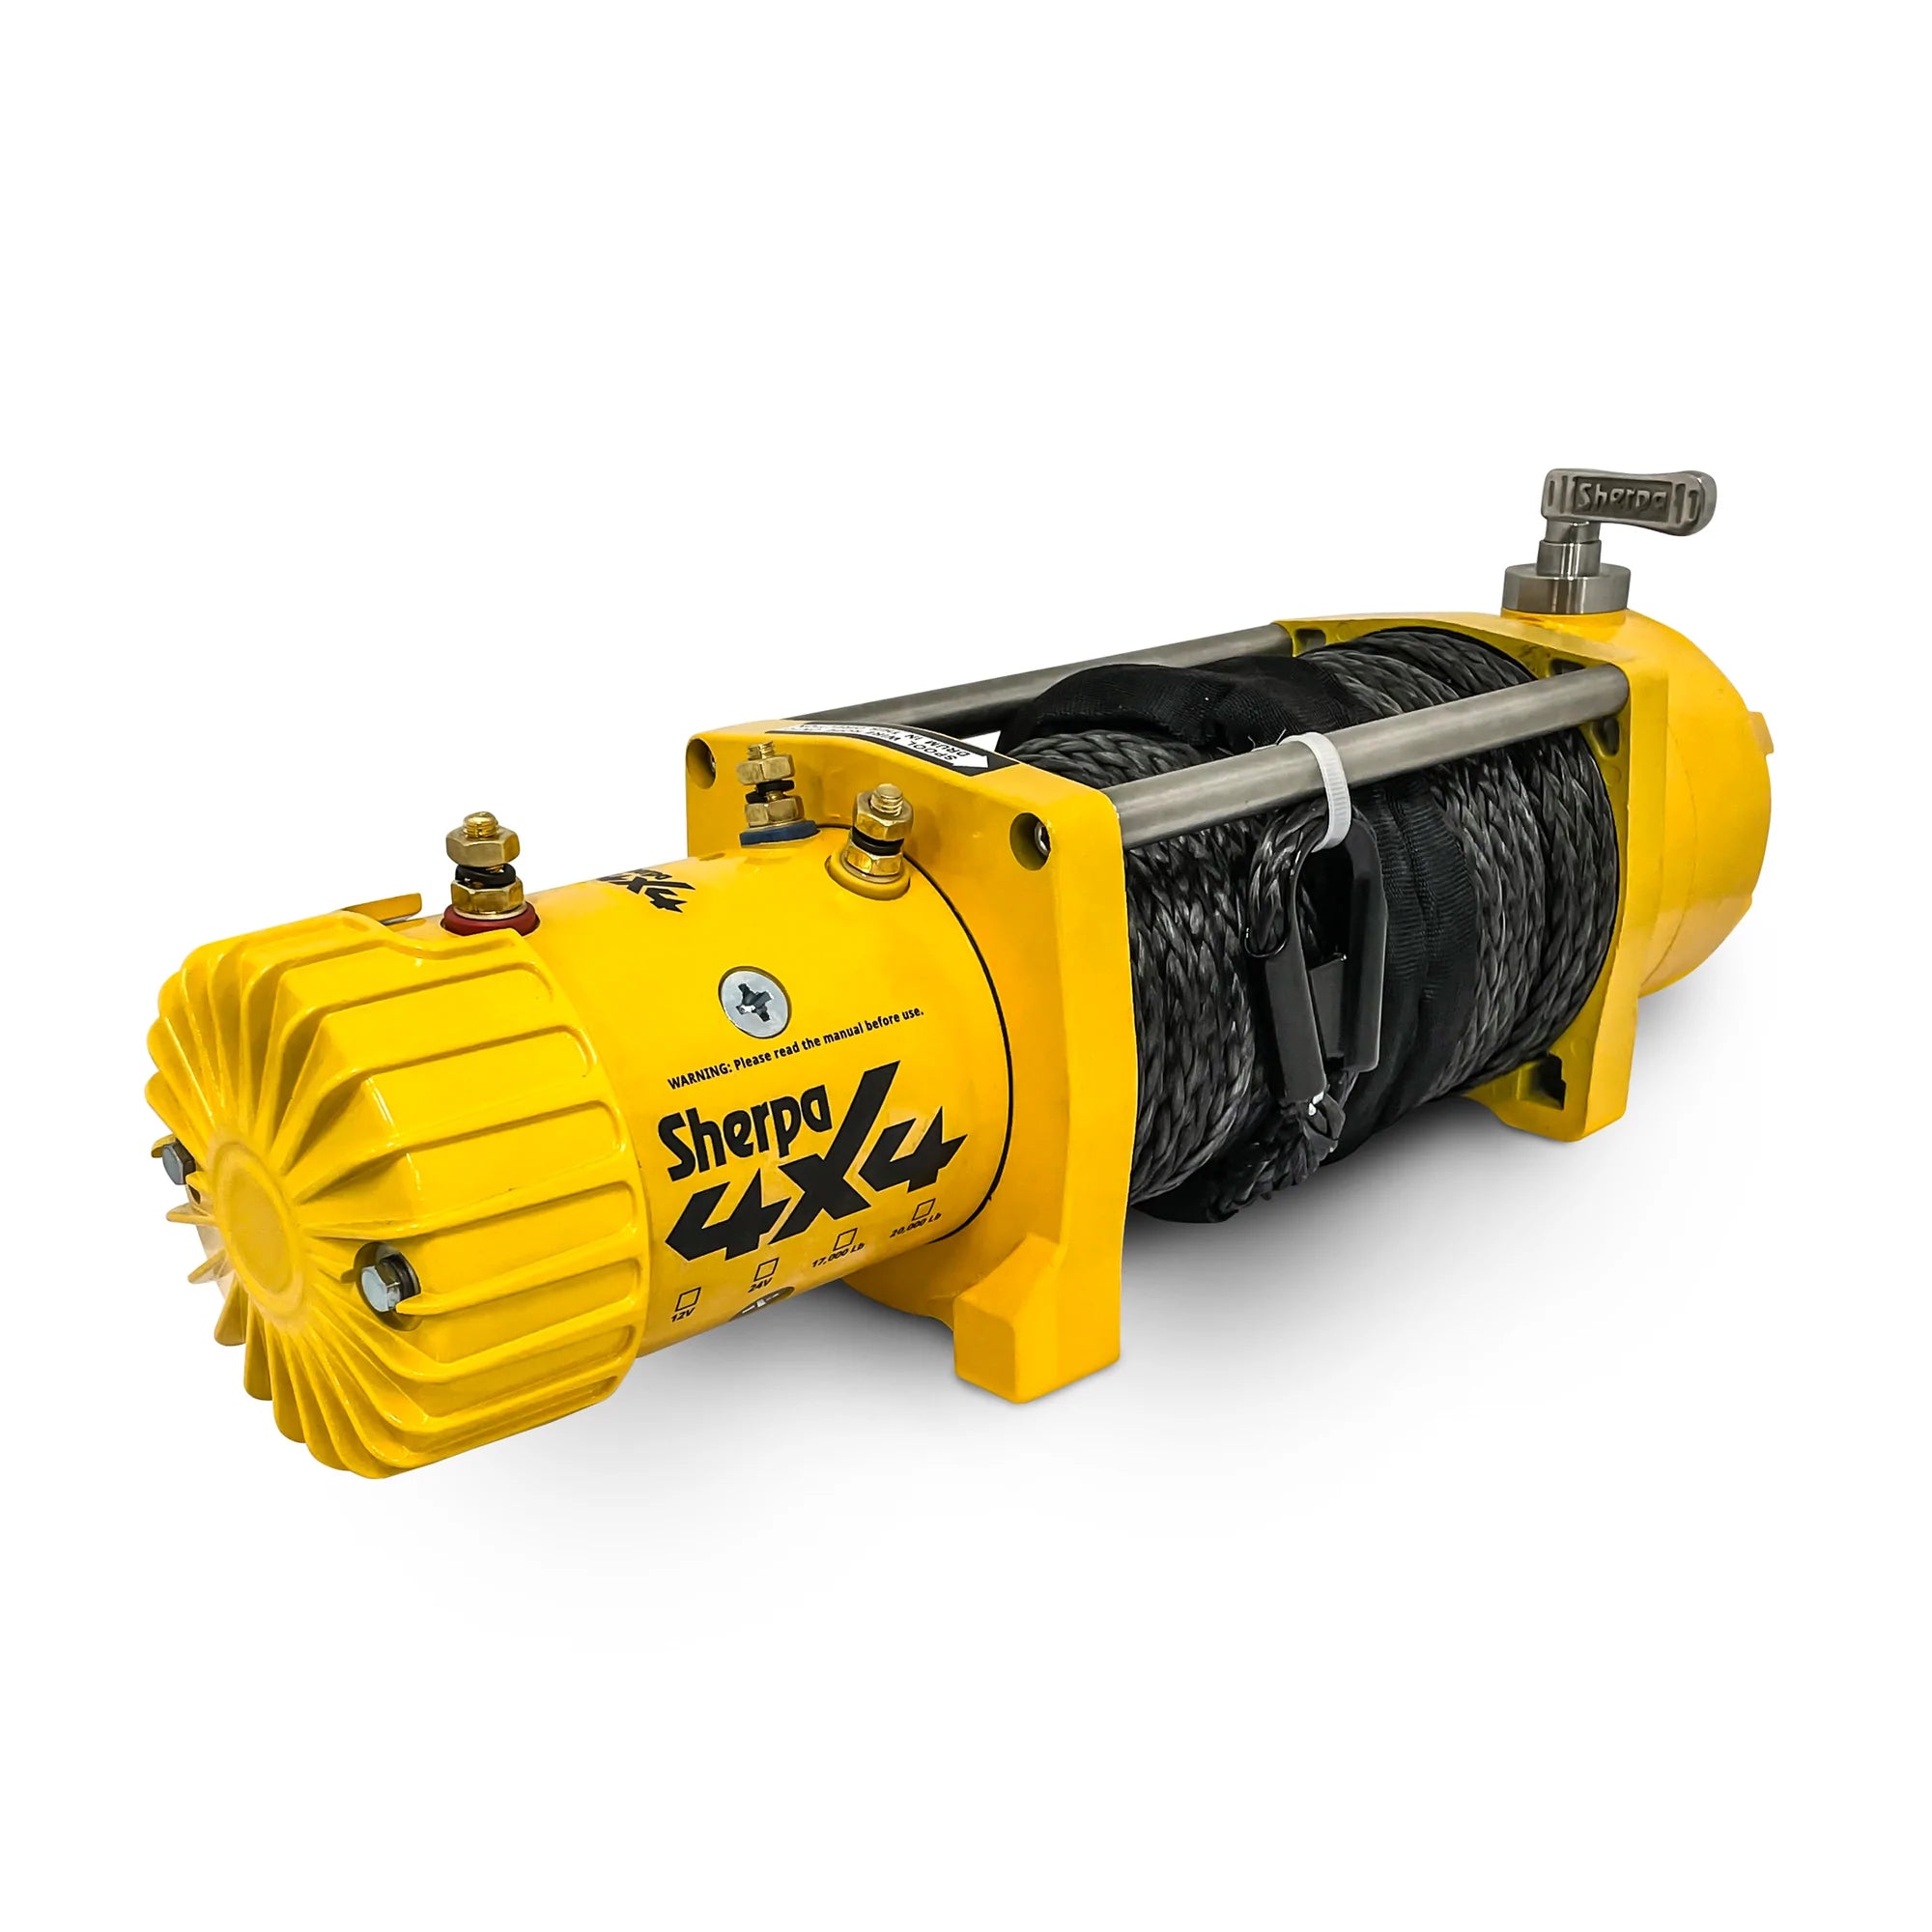 'THE BRUMBY' - 10,000LB HIGH SPEED WINCH